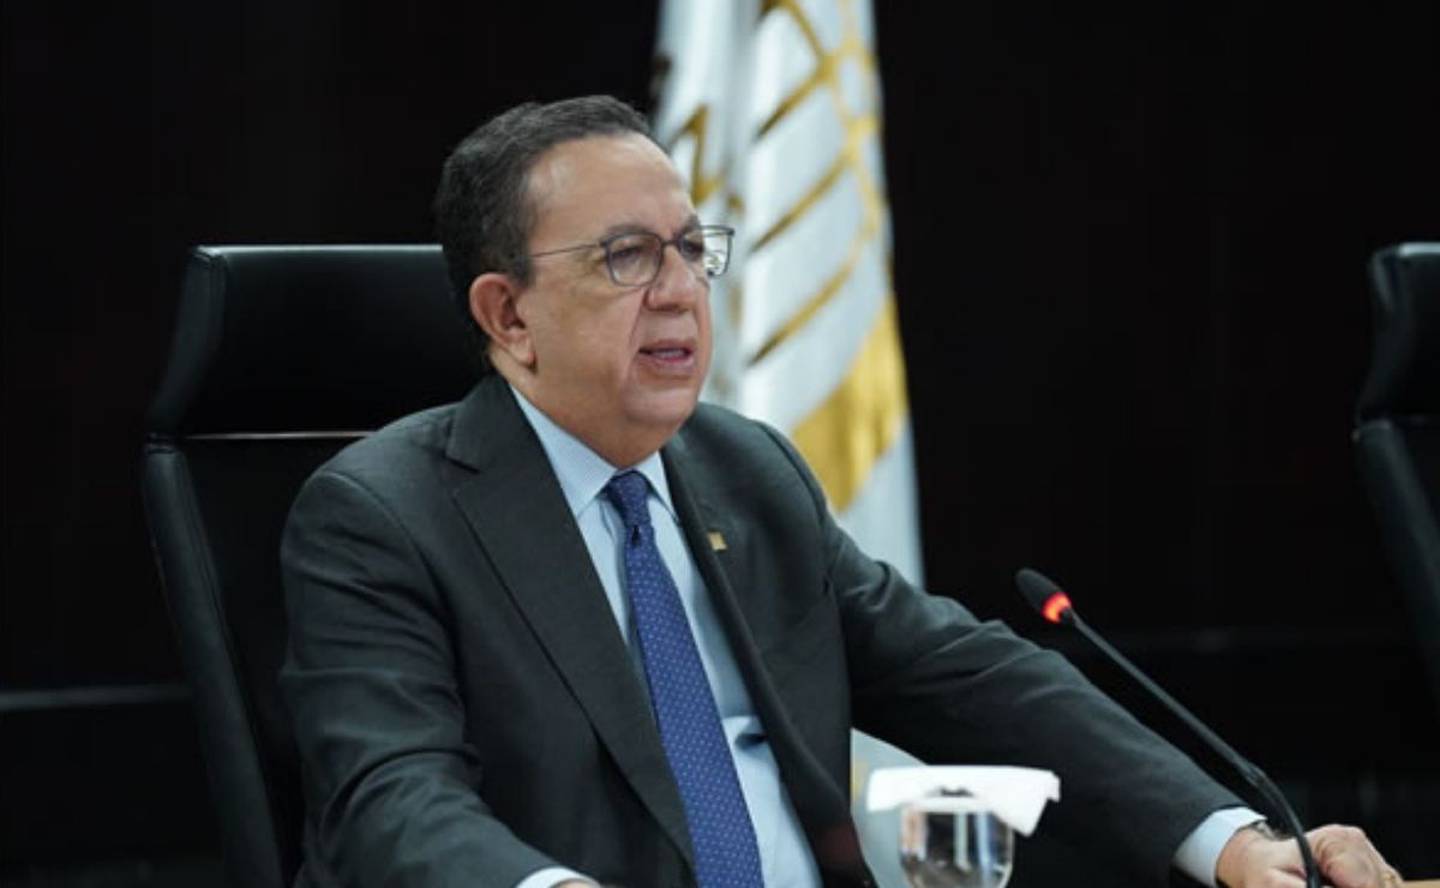 Héctor Valdez Albizu, governor of the Central Bank of the Dominican Republic. dfd